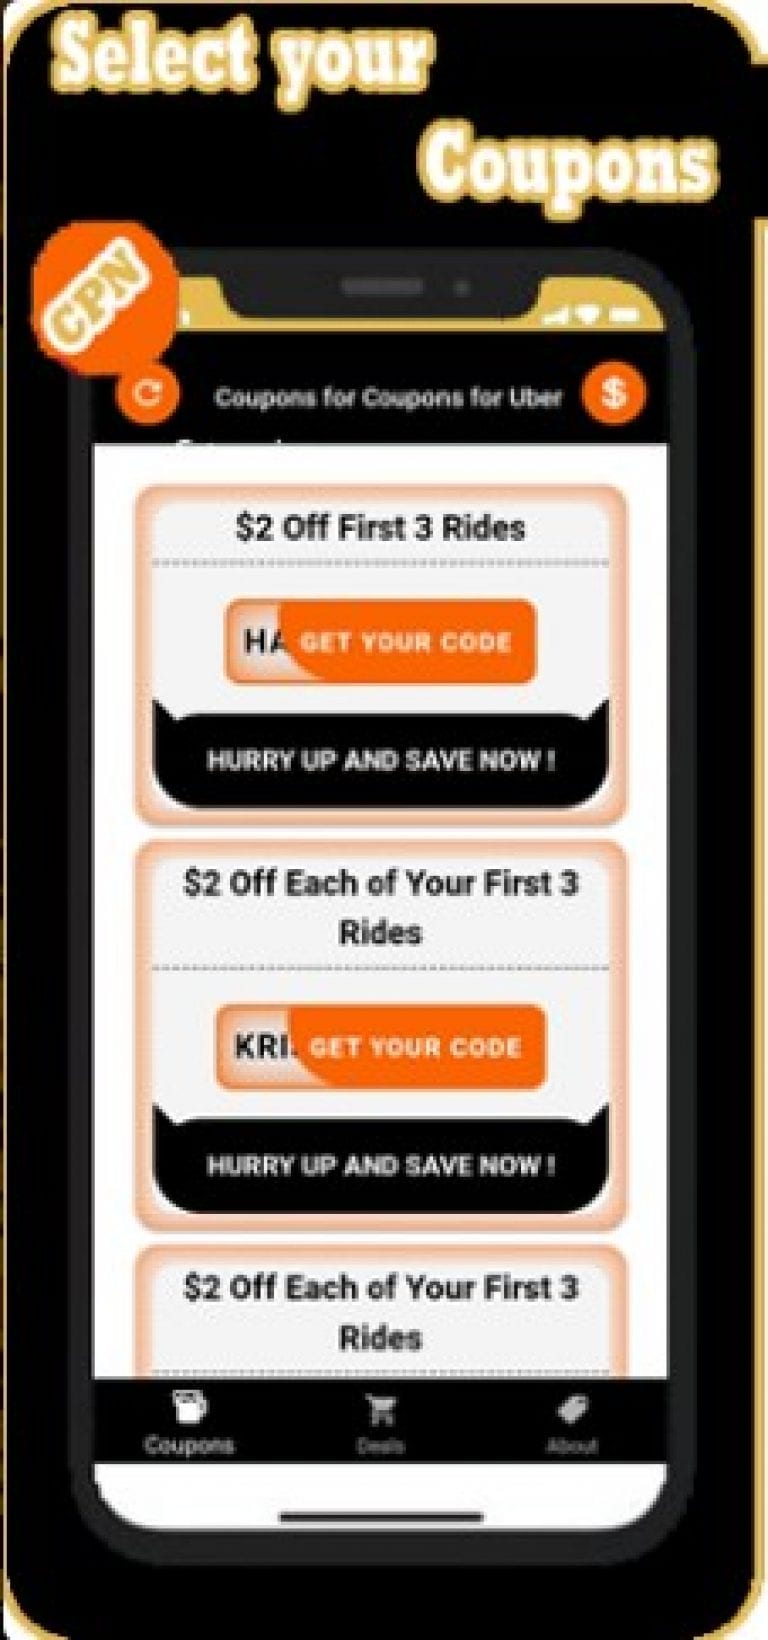 Coupons For Uber vouchers 1 Free apps for Android and iOS